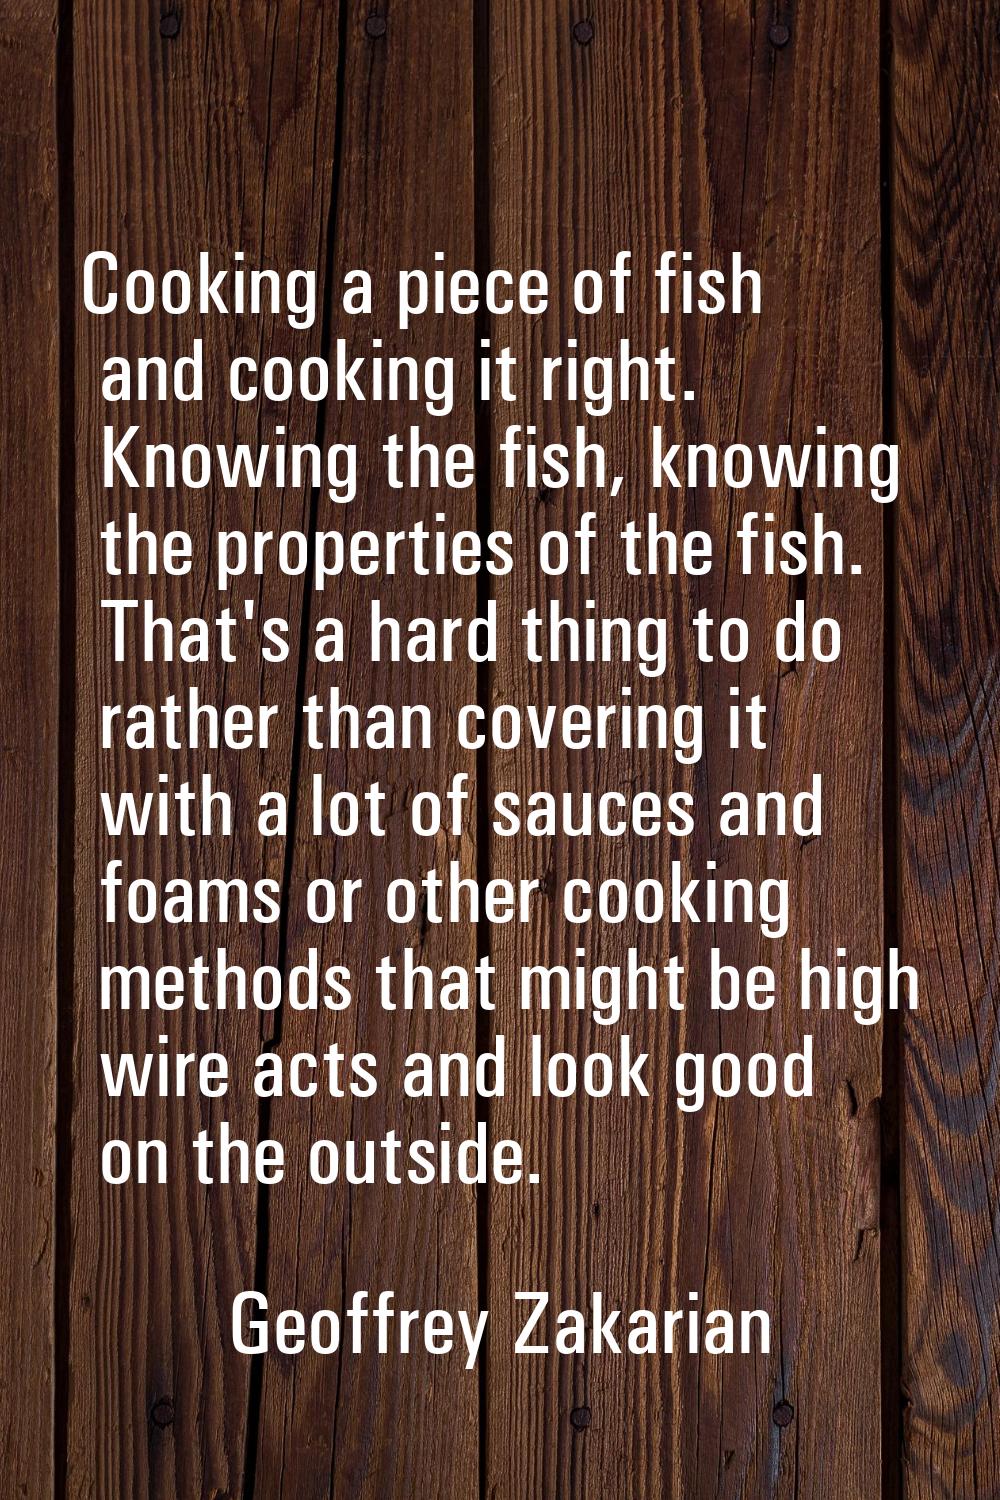 Cooking a piece of fish and cooking it right. Knowing the fish, knowing the properties of the fish.